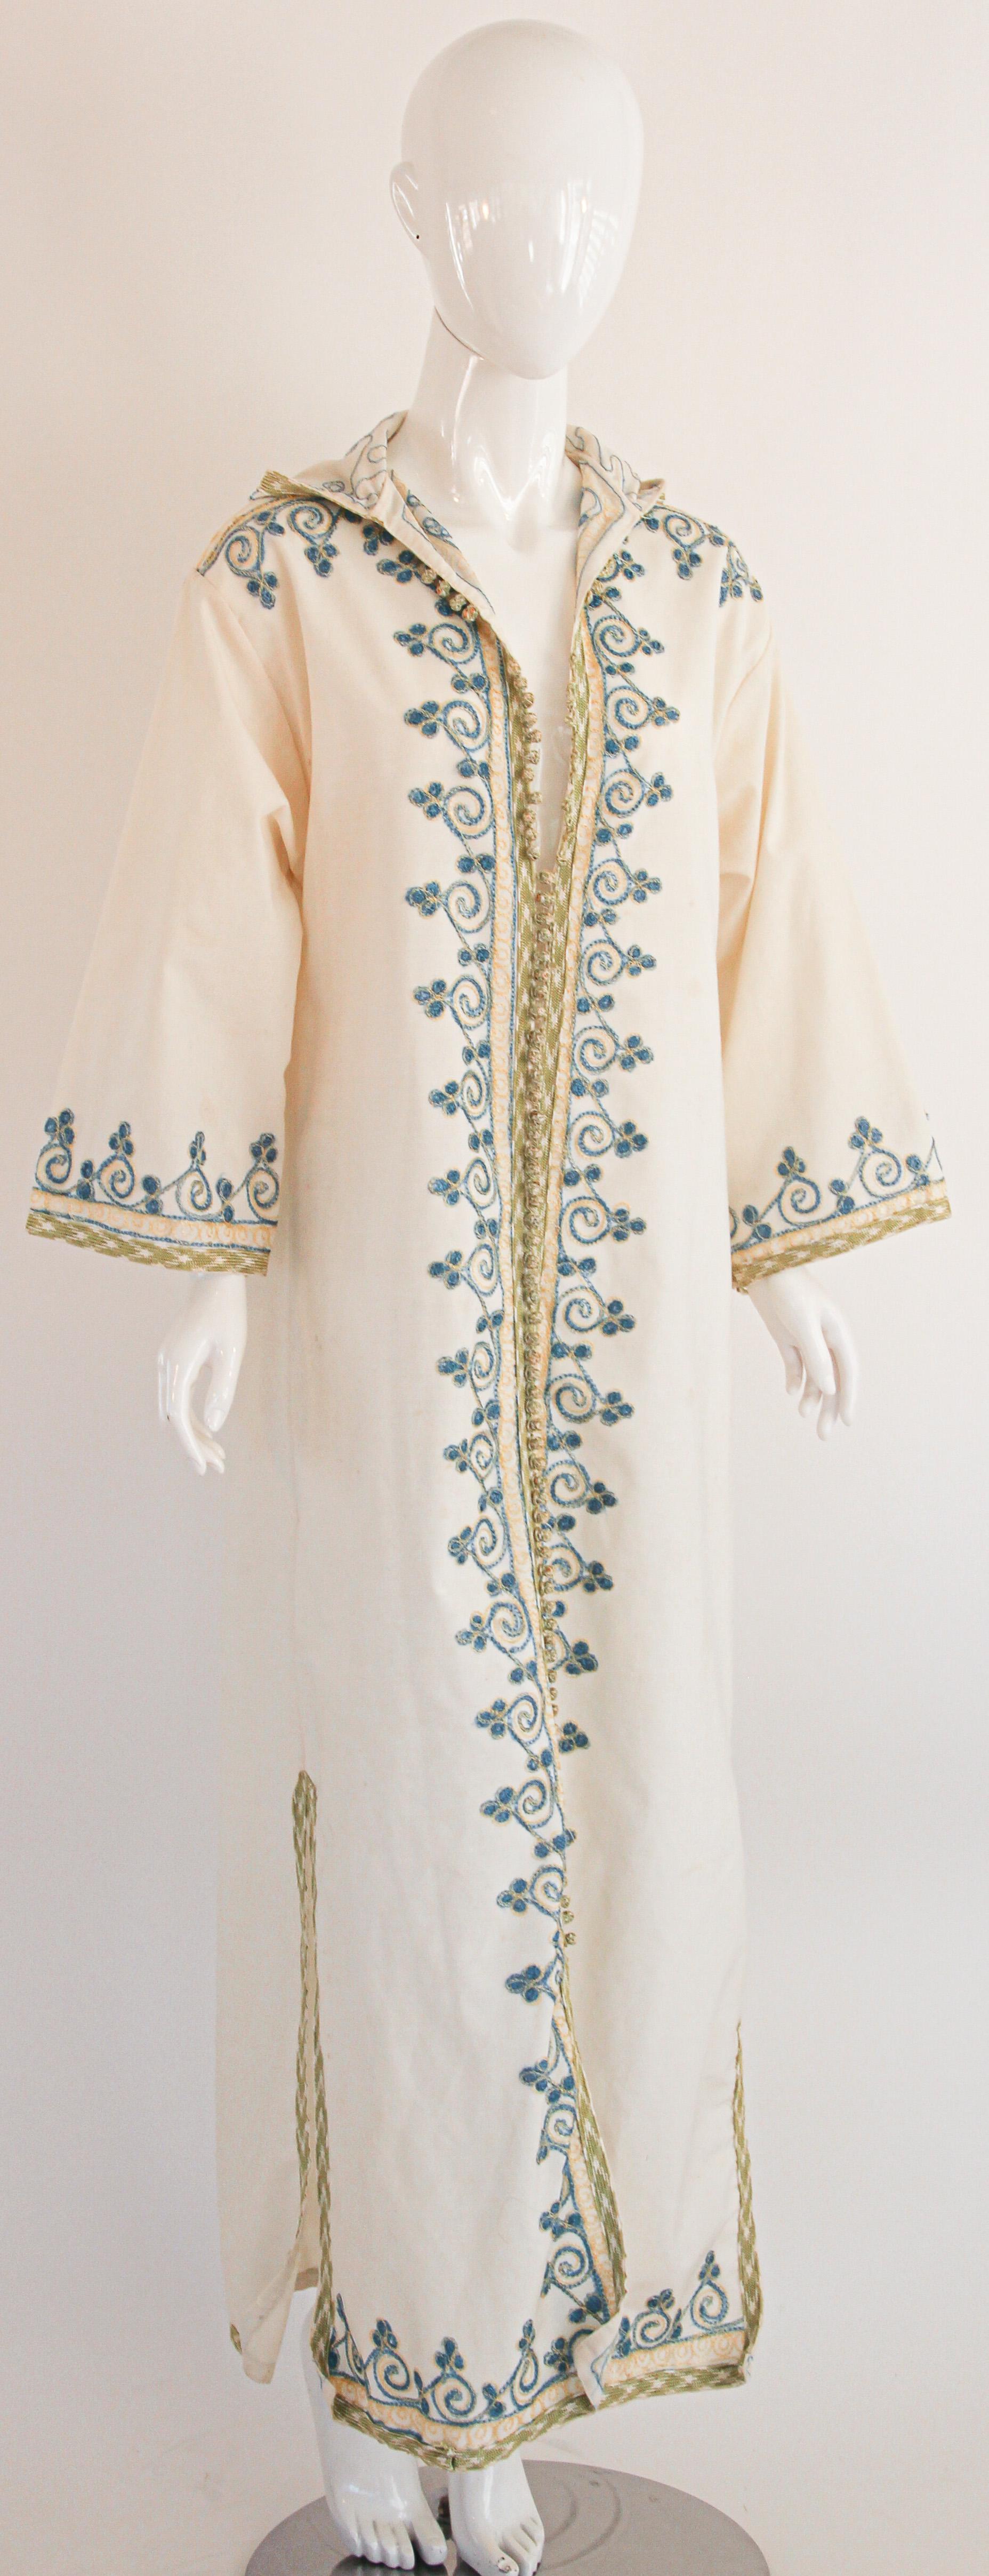 Elegant vintage Moroccan white cotton caftan with turquoise and gold embroidered trim,
circa 1970s.
This long maxi dress kaftan is embroidered and embellished entirely by hand.
It’s crafted in Morocco and tailored for a relaxed fit.
One of a kind